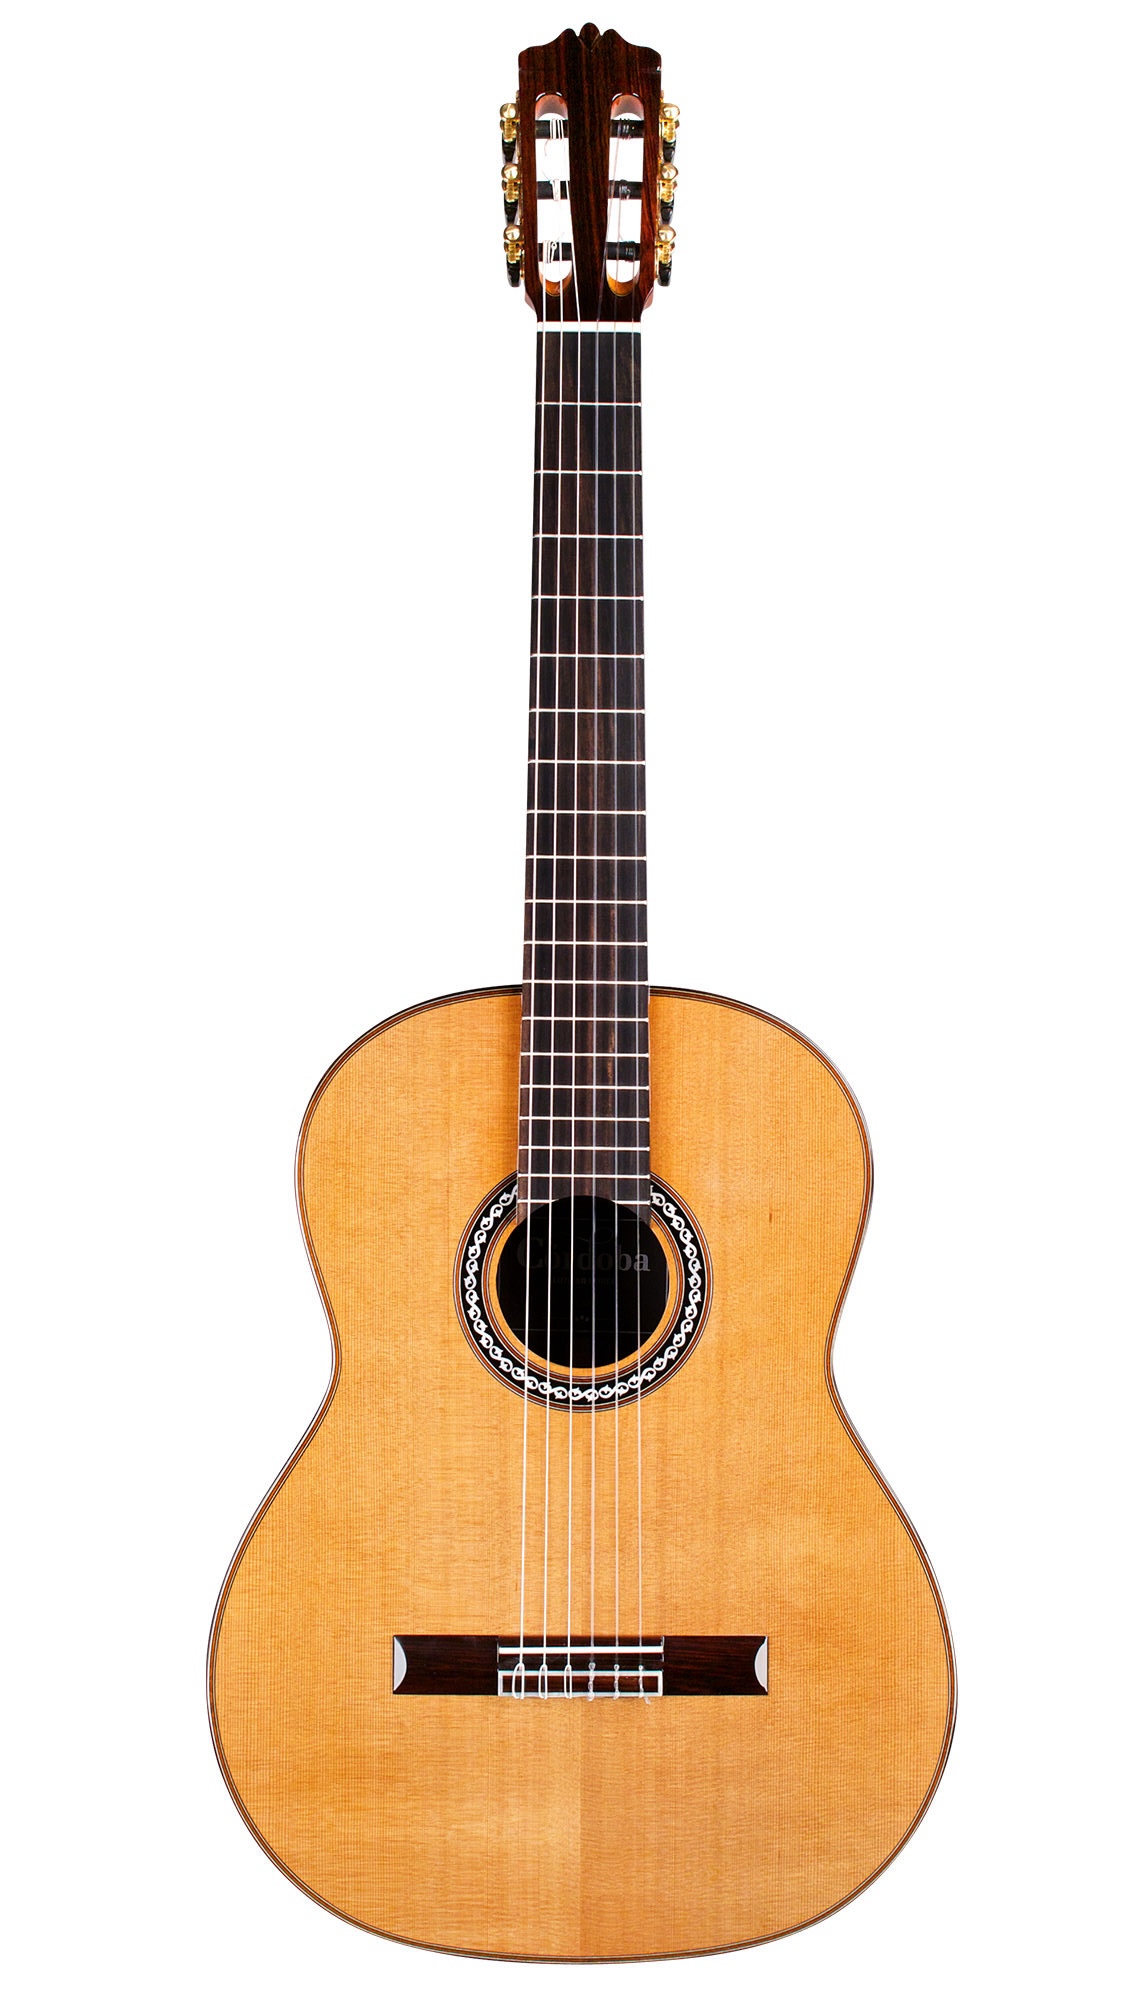 The Epitome of Elegance: A Review of the Cordoba C10 Classical Guitar